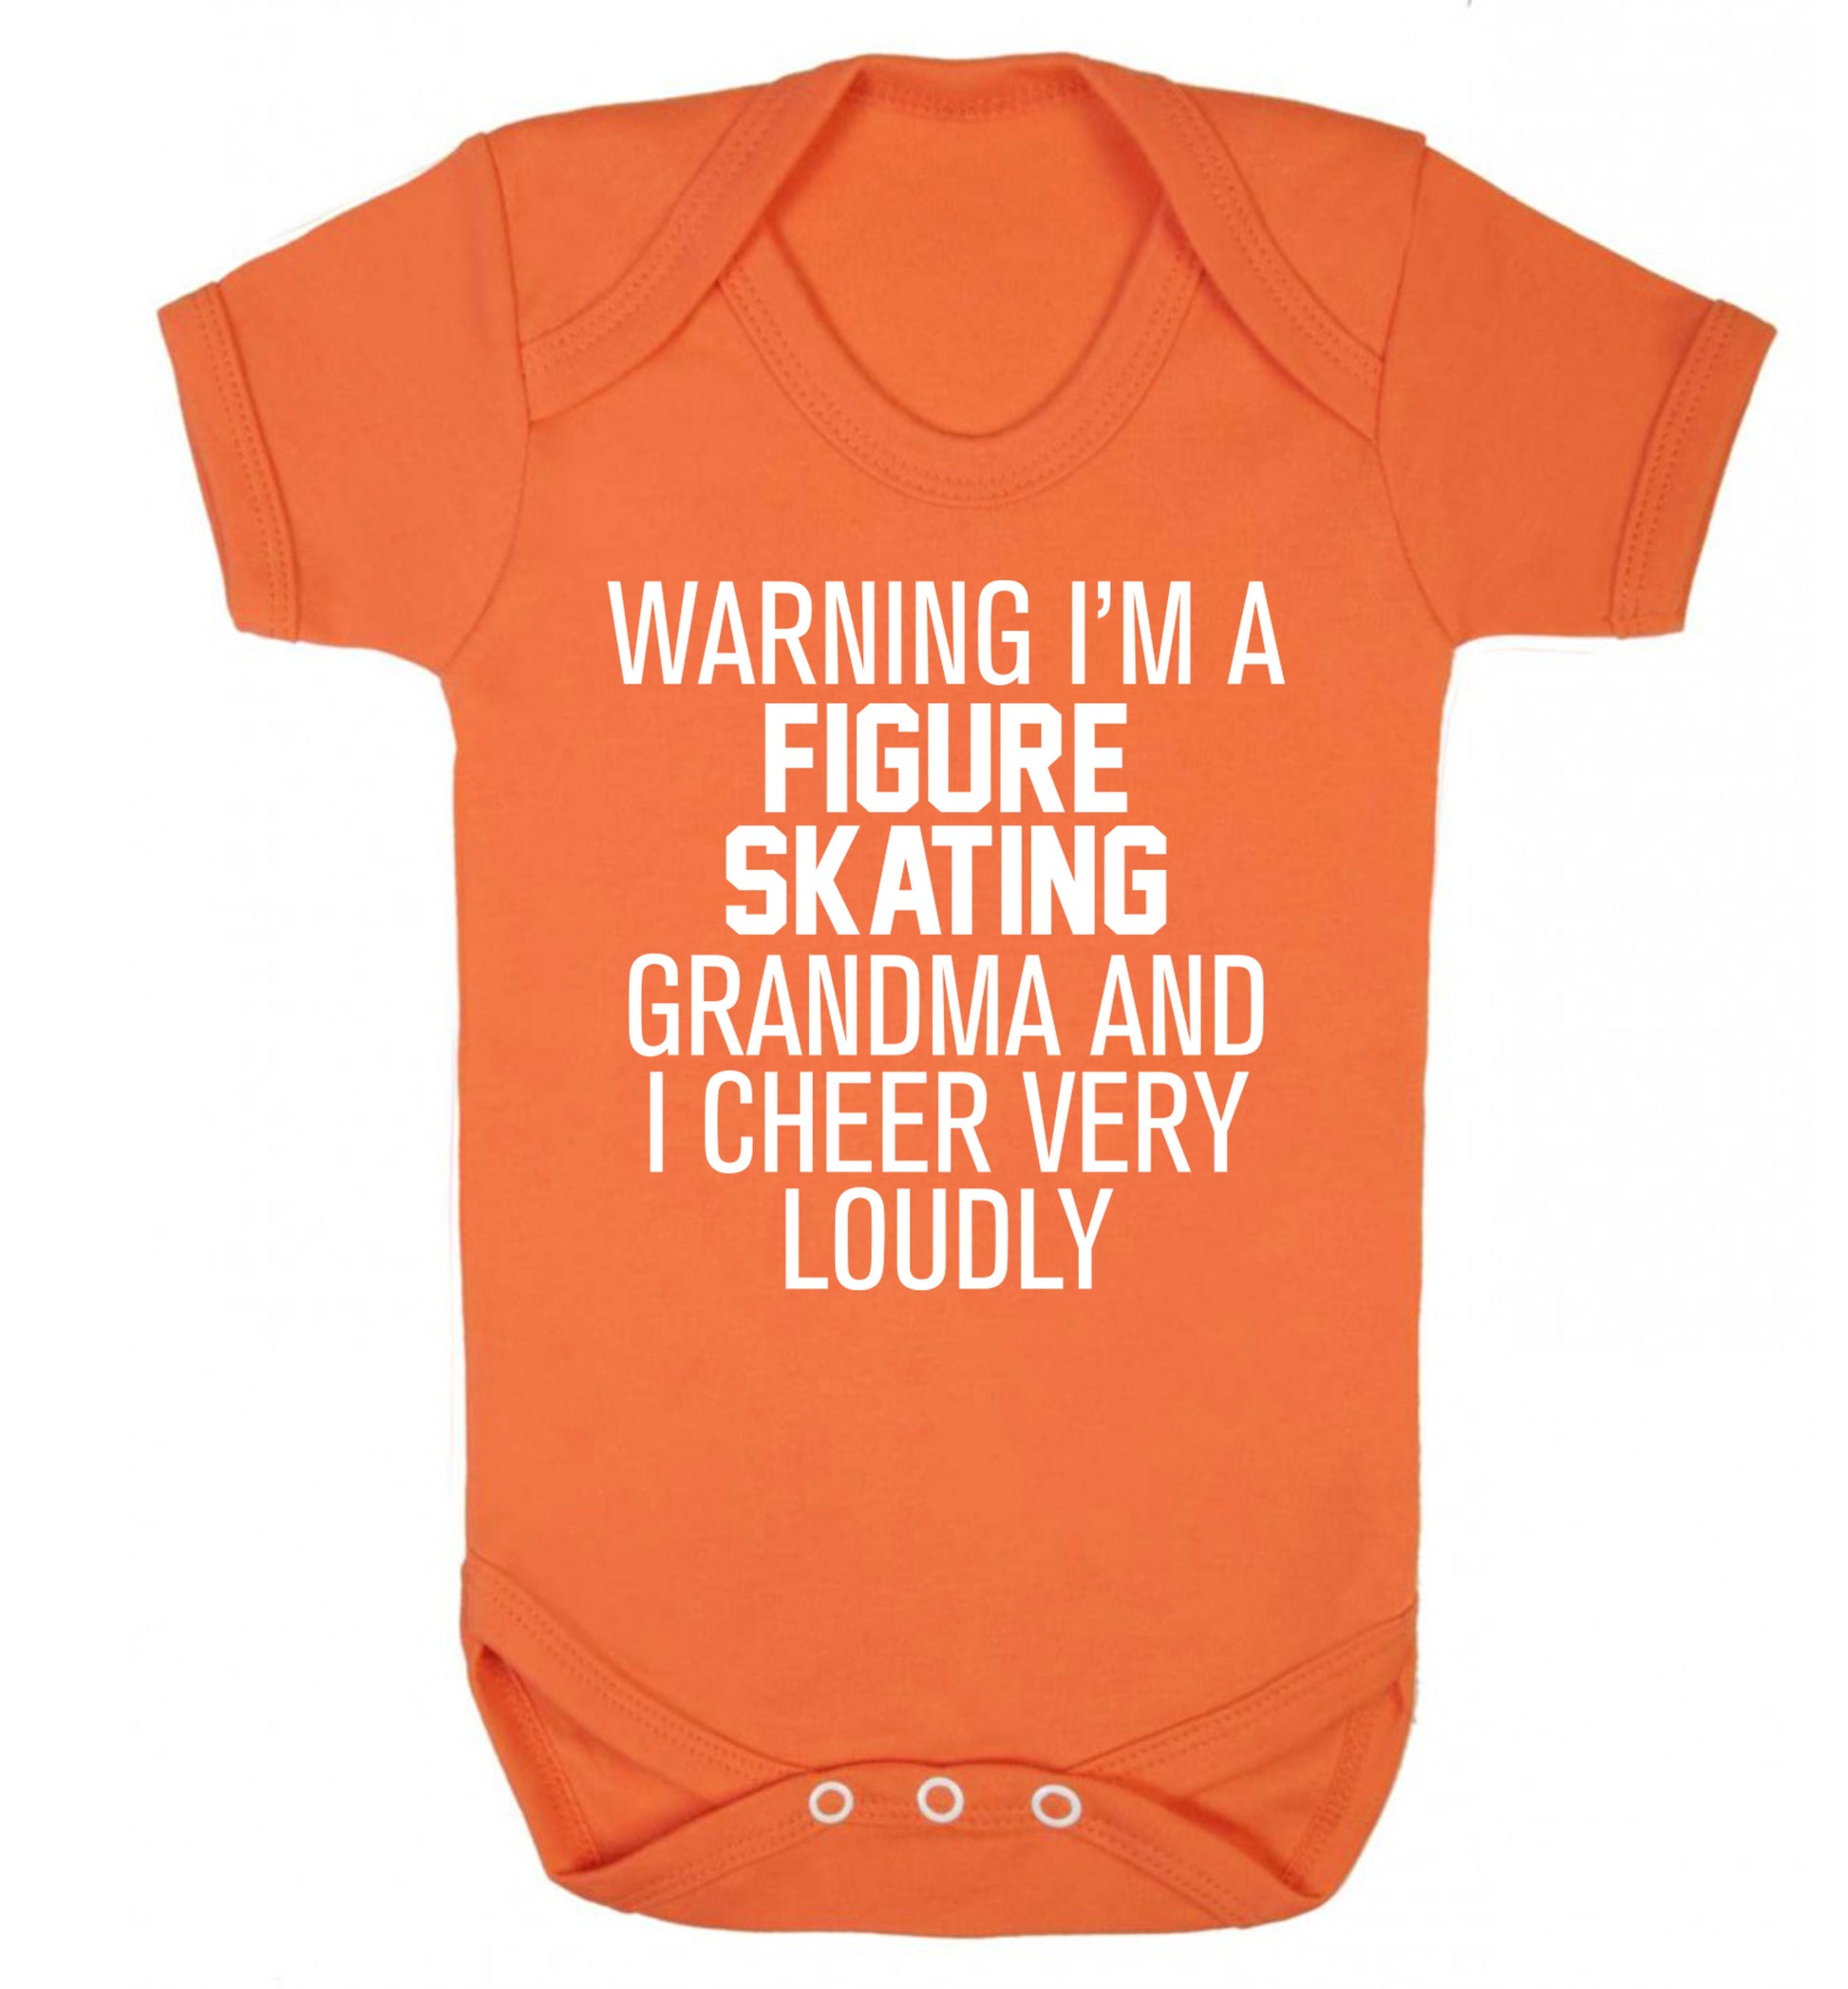 Warning I'm a figure skating grandma and I cheer very loudly Baby Vest orange 18-24 months